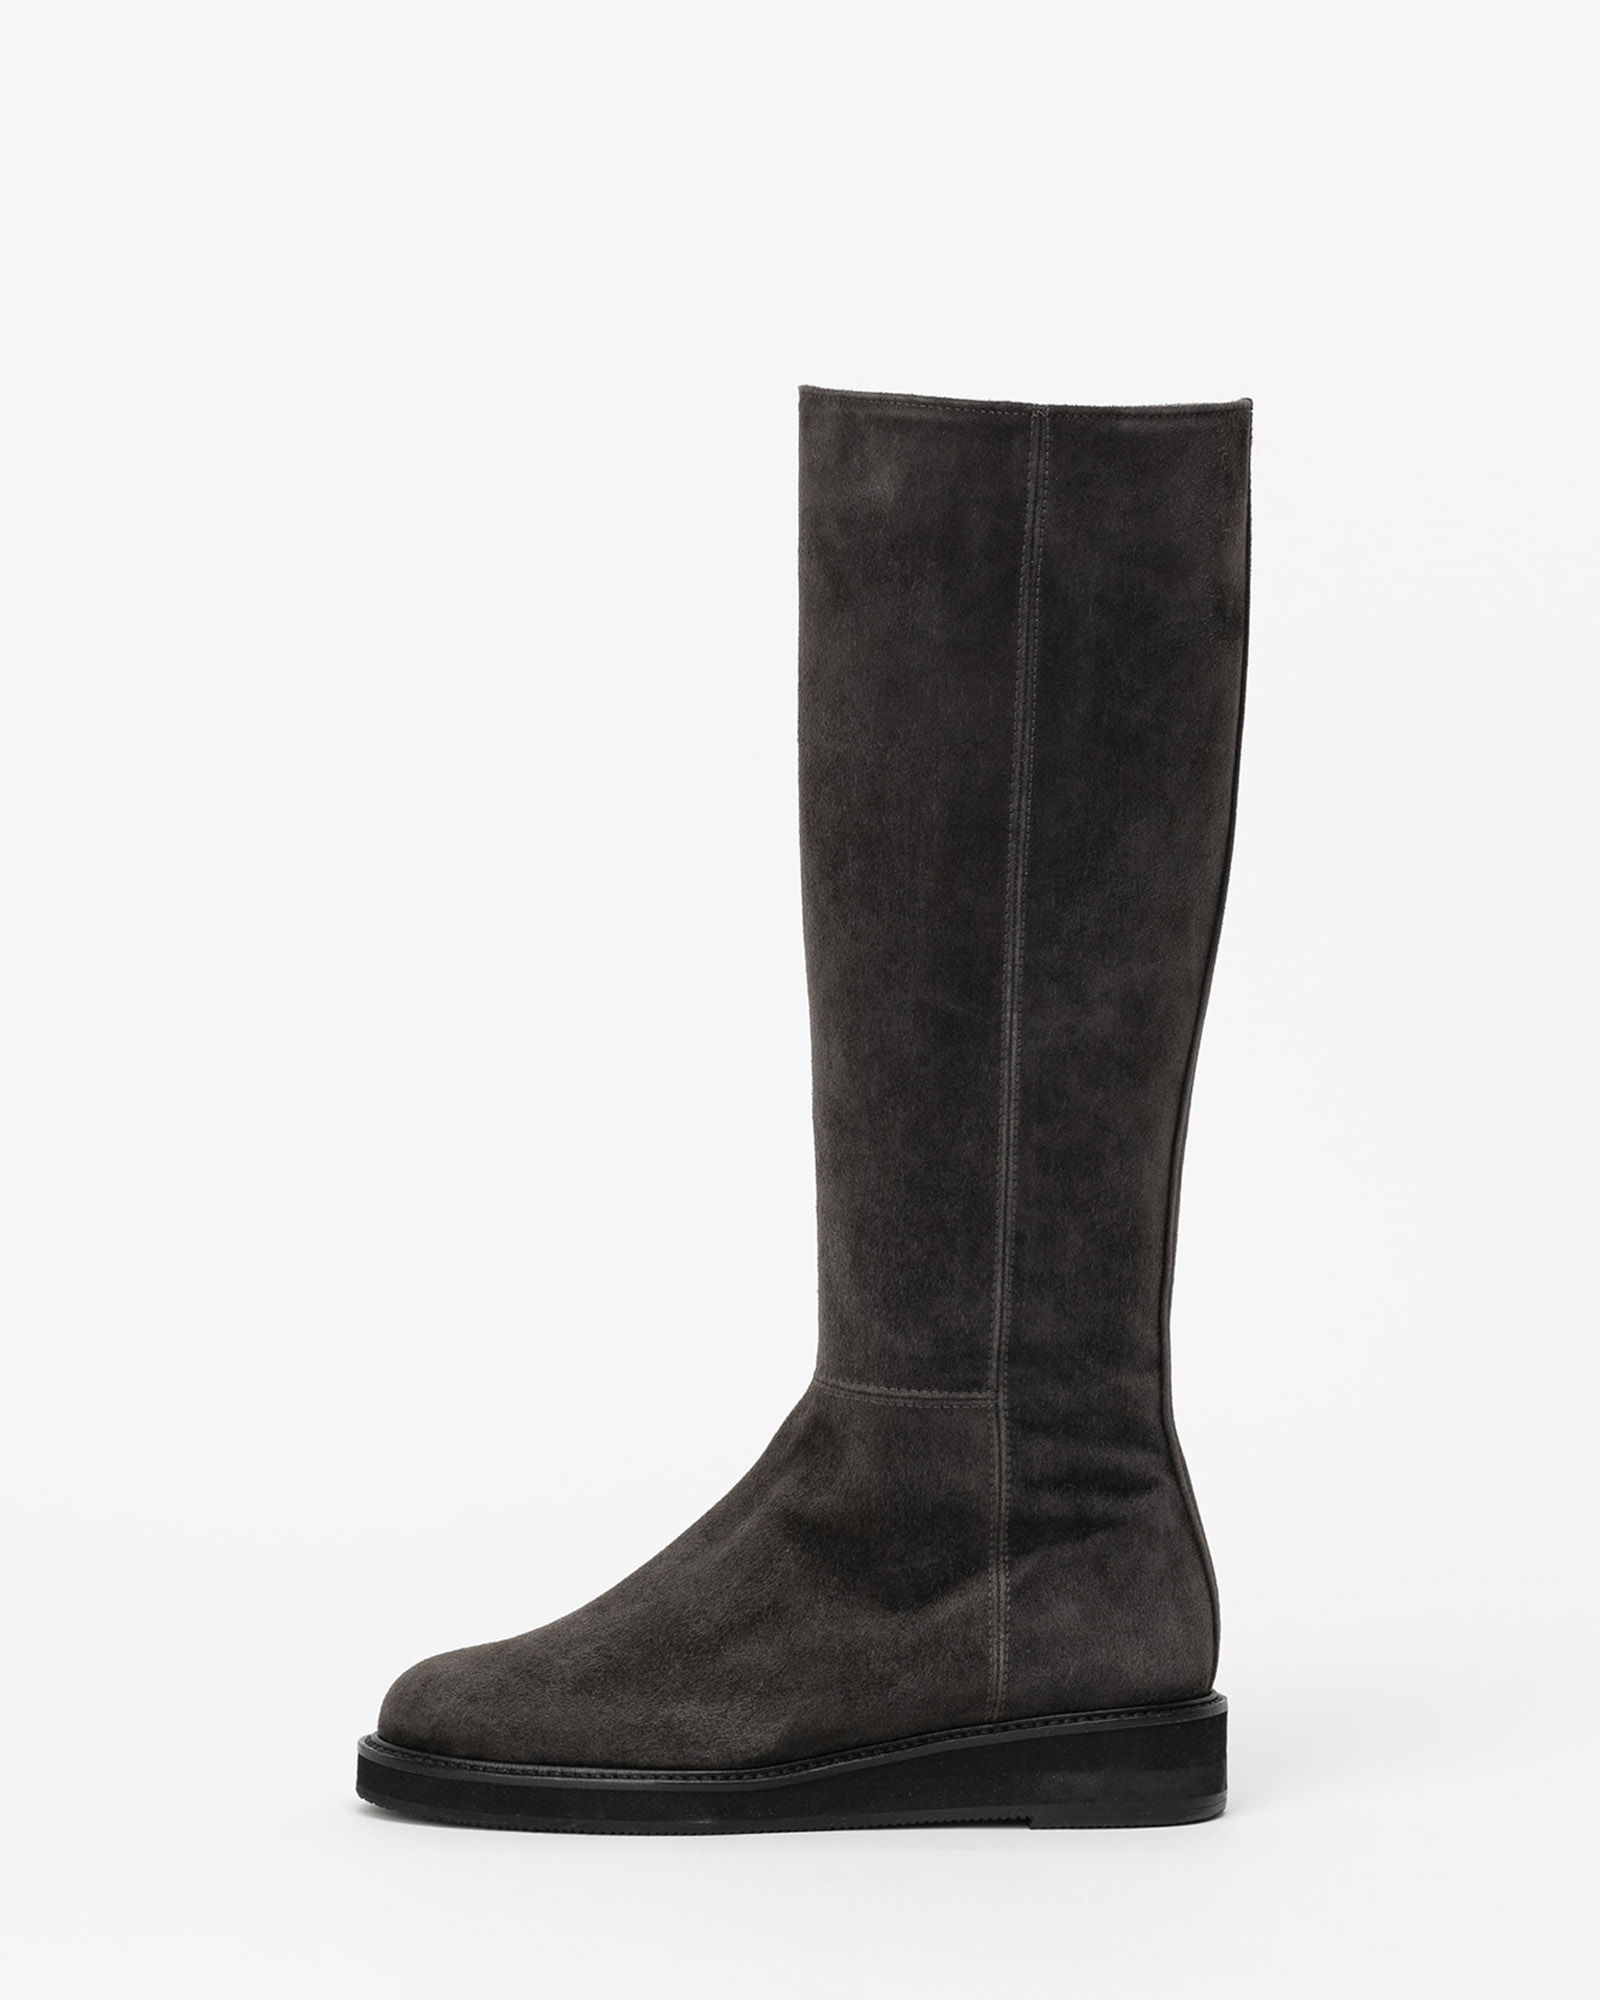 Seychelle Boots in Charcoal Grey Suede